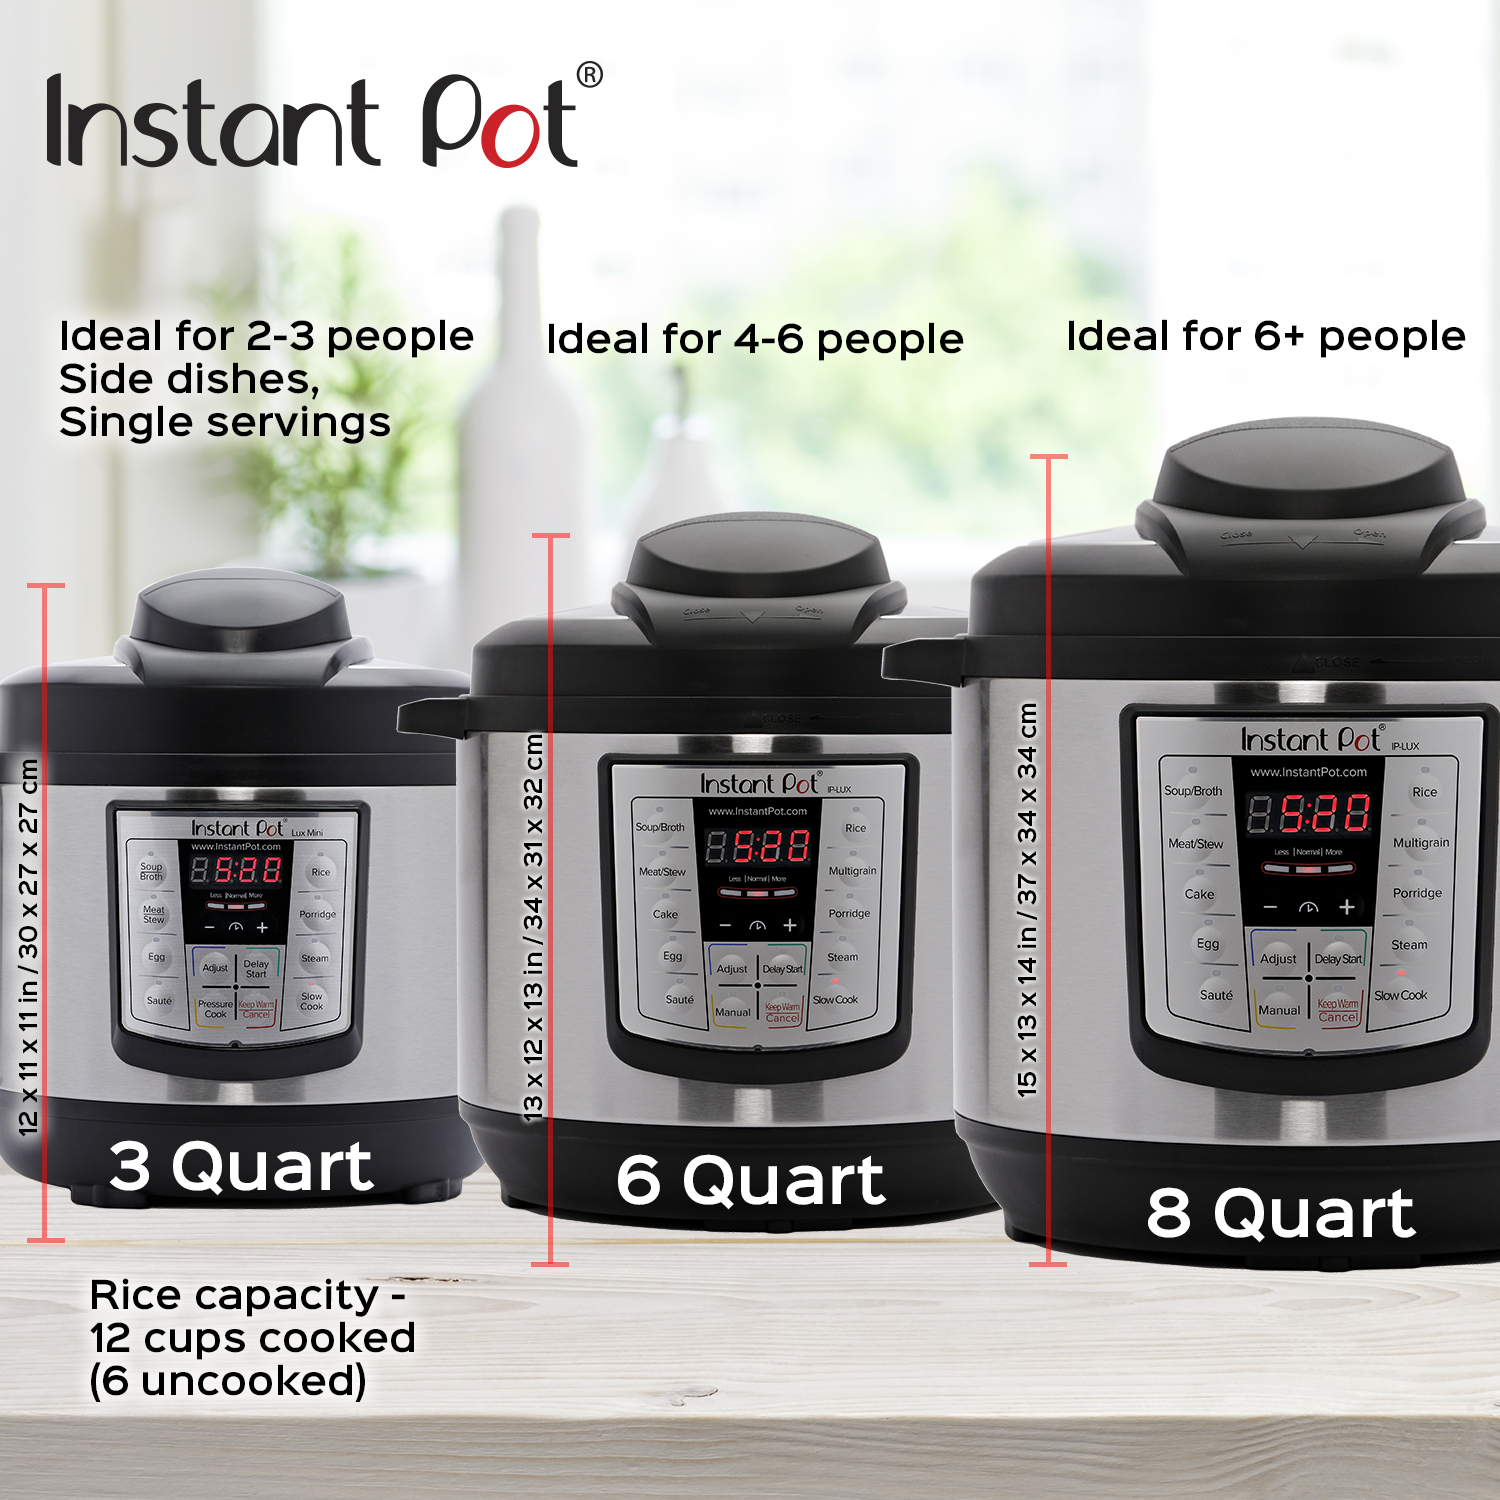 Instant Pot LUX60 6 Qt 6-in-1 Multi-Use Programmable Pressure Cooker, Slow Cooker, Rice Cooker, Saut, Steamer, and Warmer - image 7 of 7